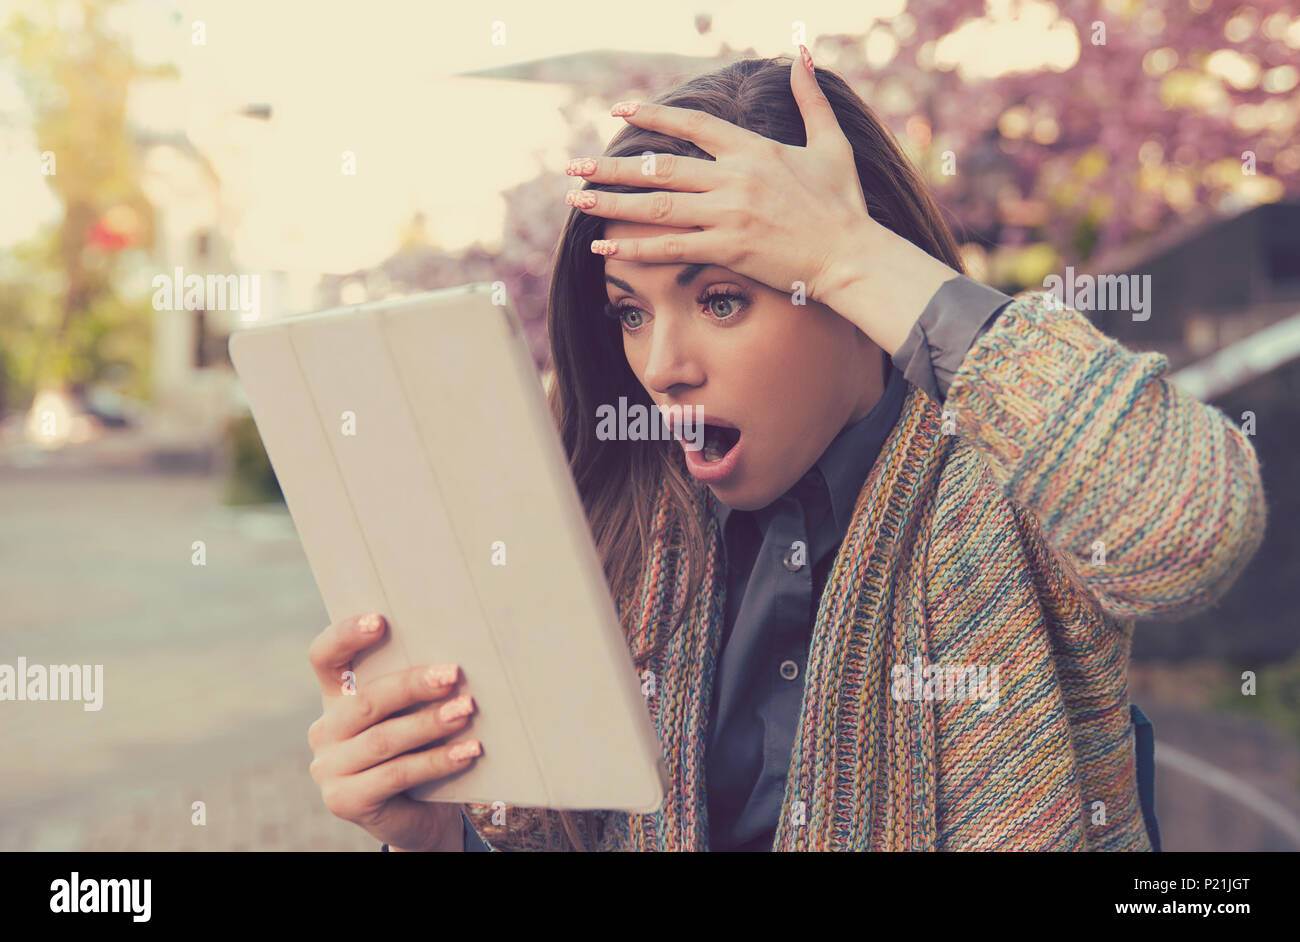 Upset woman astonished surprised by what she sees on her tablet pad standing outside in the city street Stock Photo